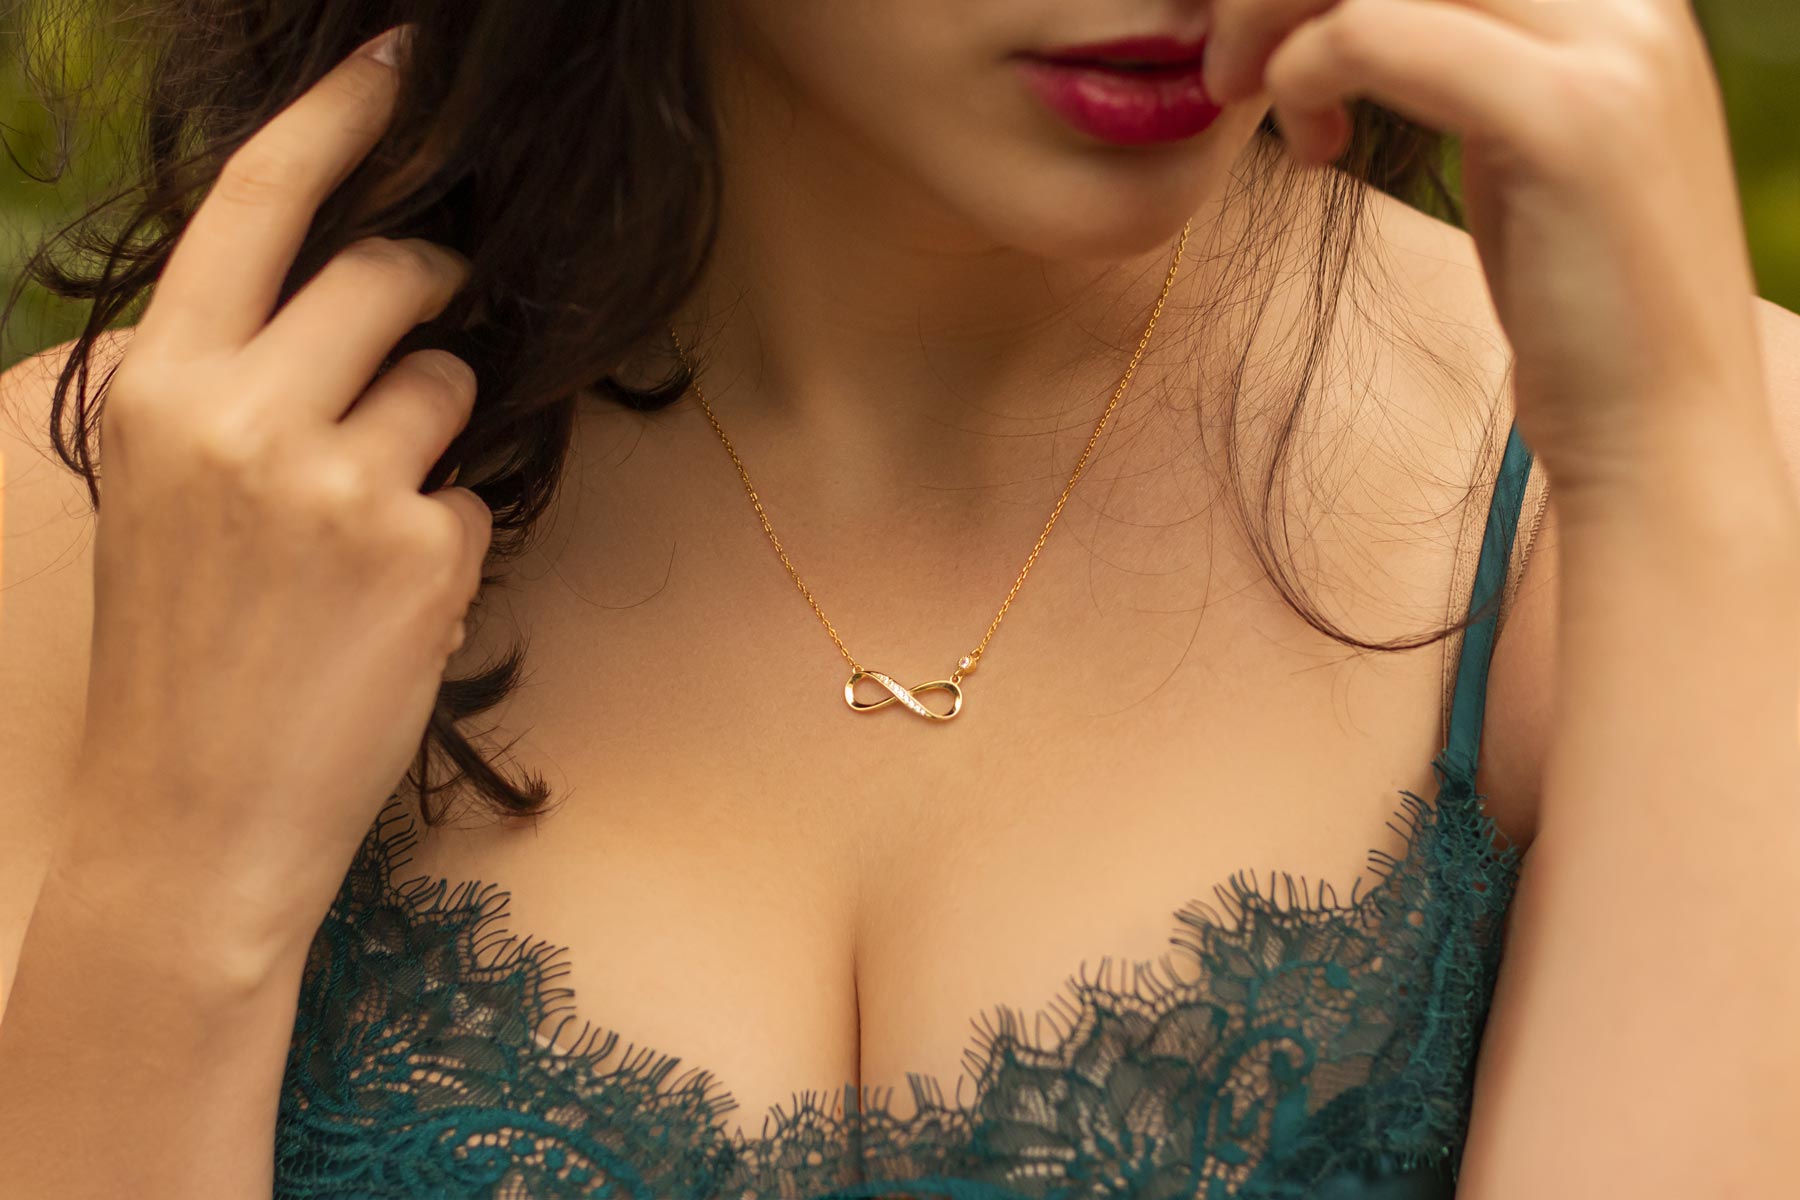 Woman wearing chemise and infinity necklace